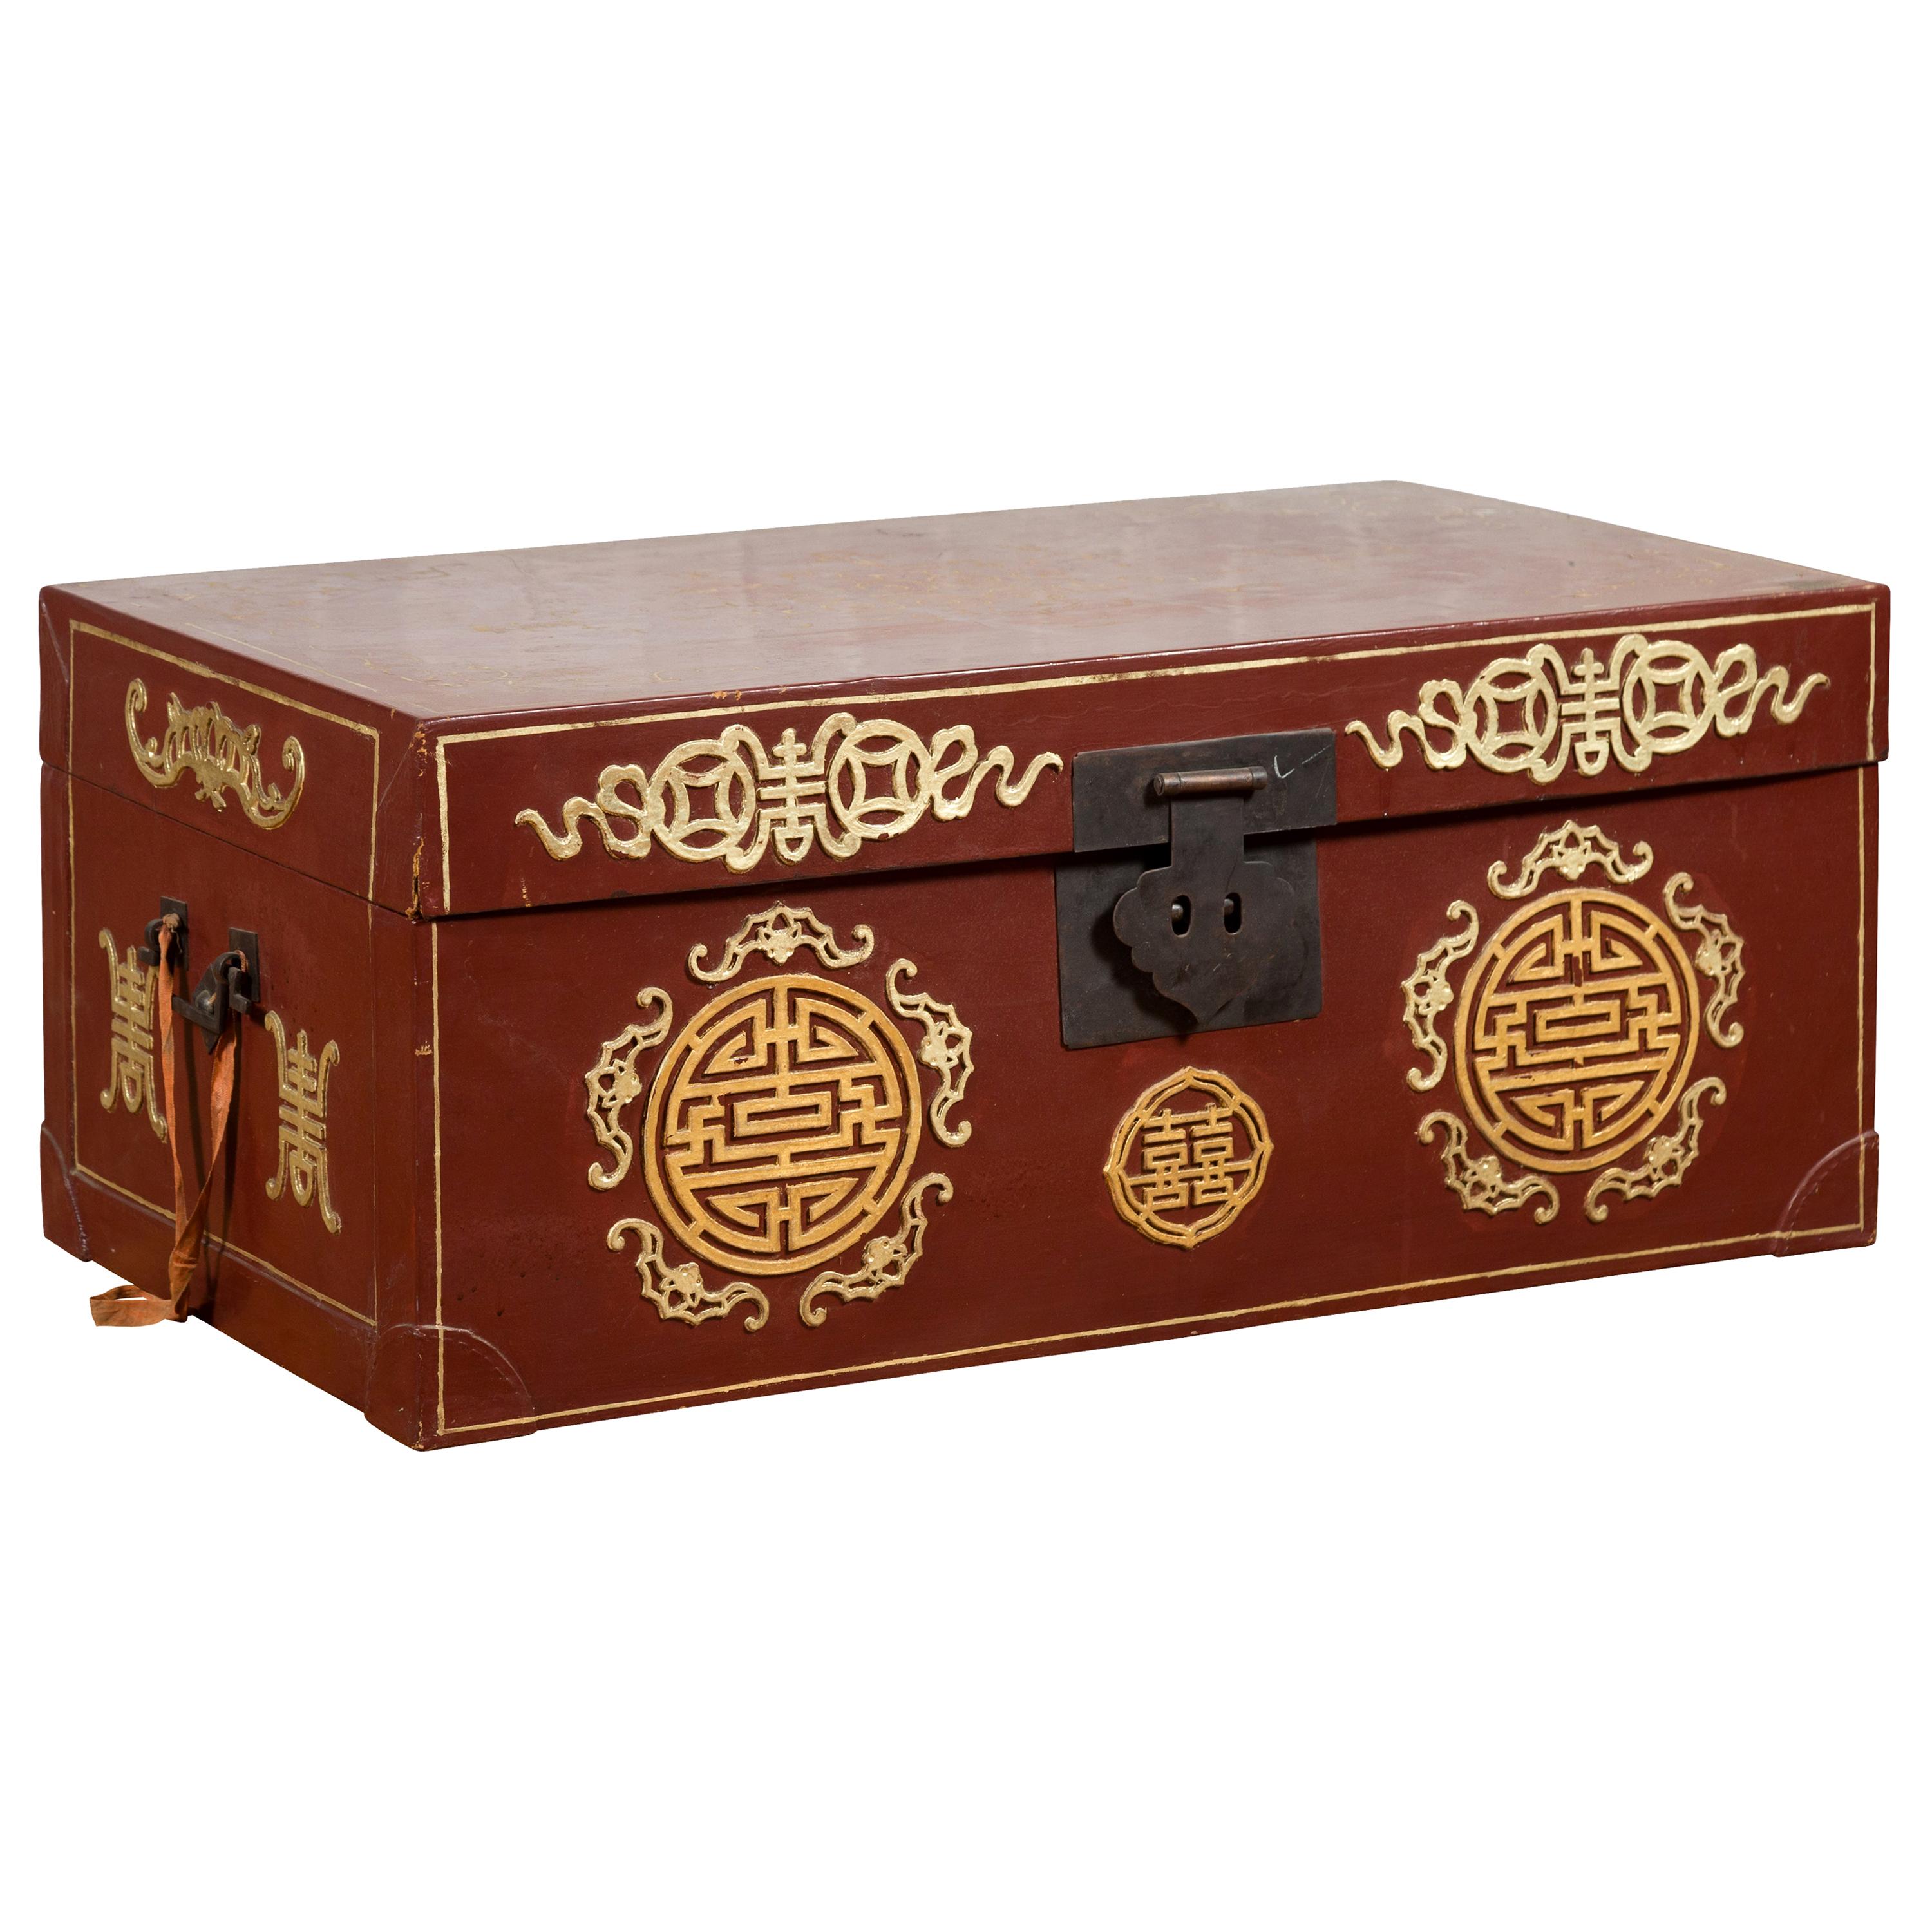 Vintage Chinese Red Blanket Chest with Gold Details and Calligraphy Motifs For Sale